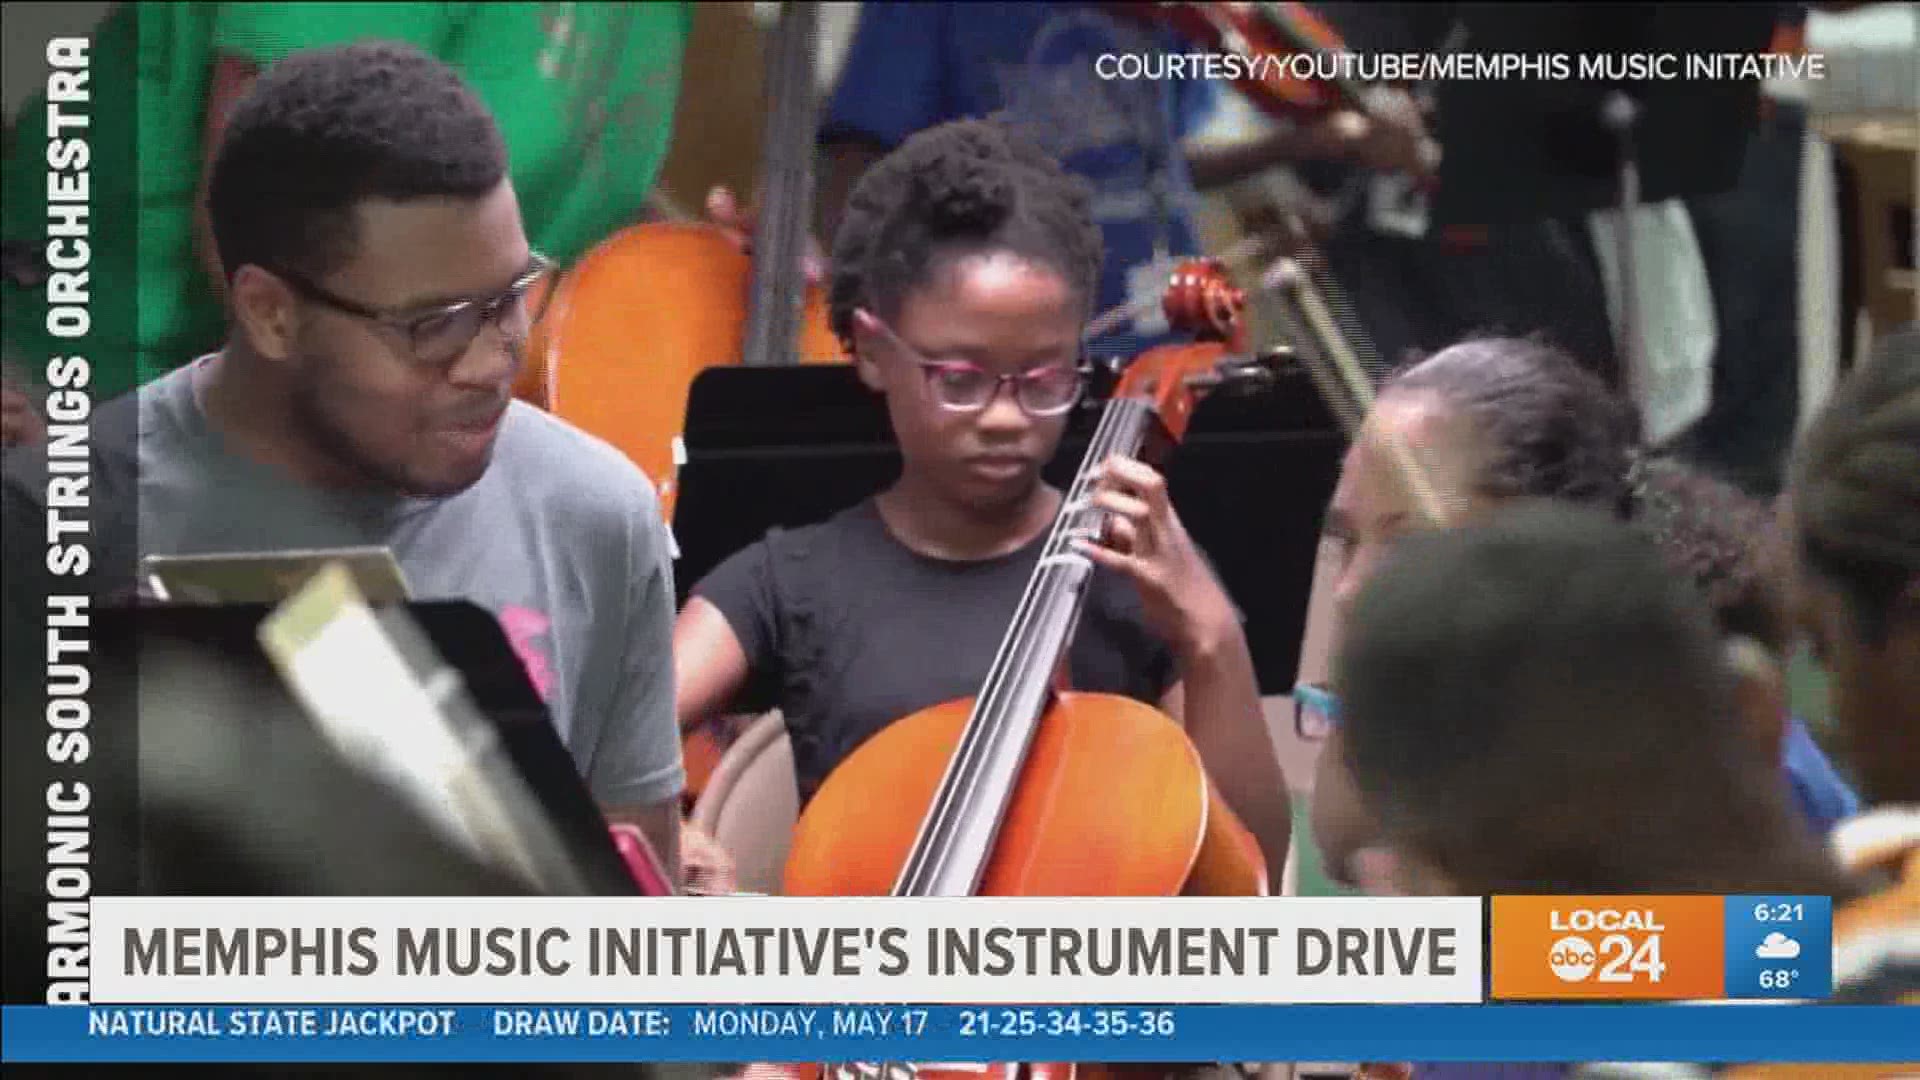 Memphis Music Initiative wants to make it easier and more equitable for Black and Latino students to get engaged and pursue music